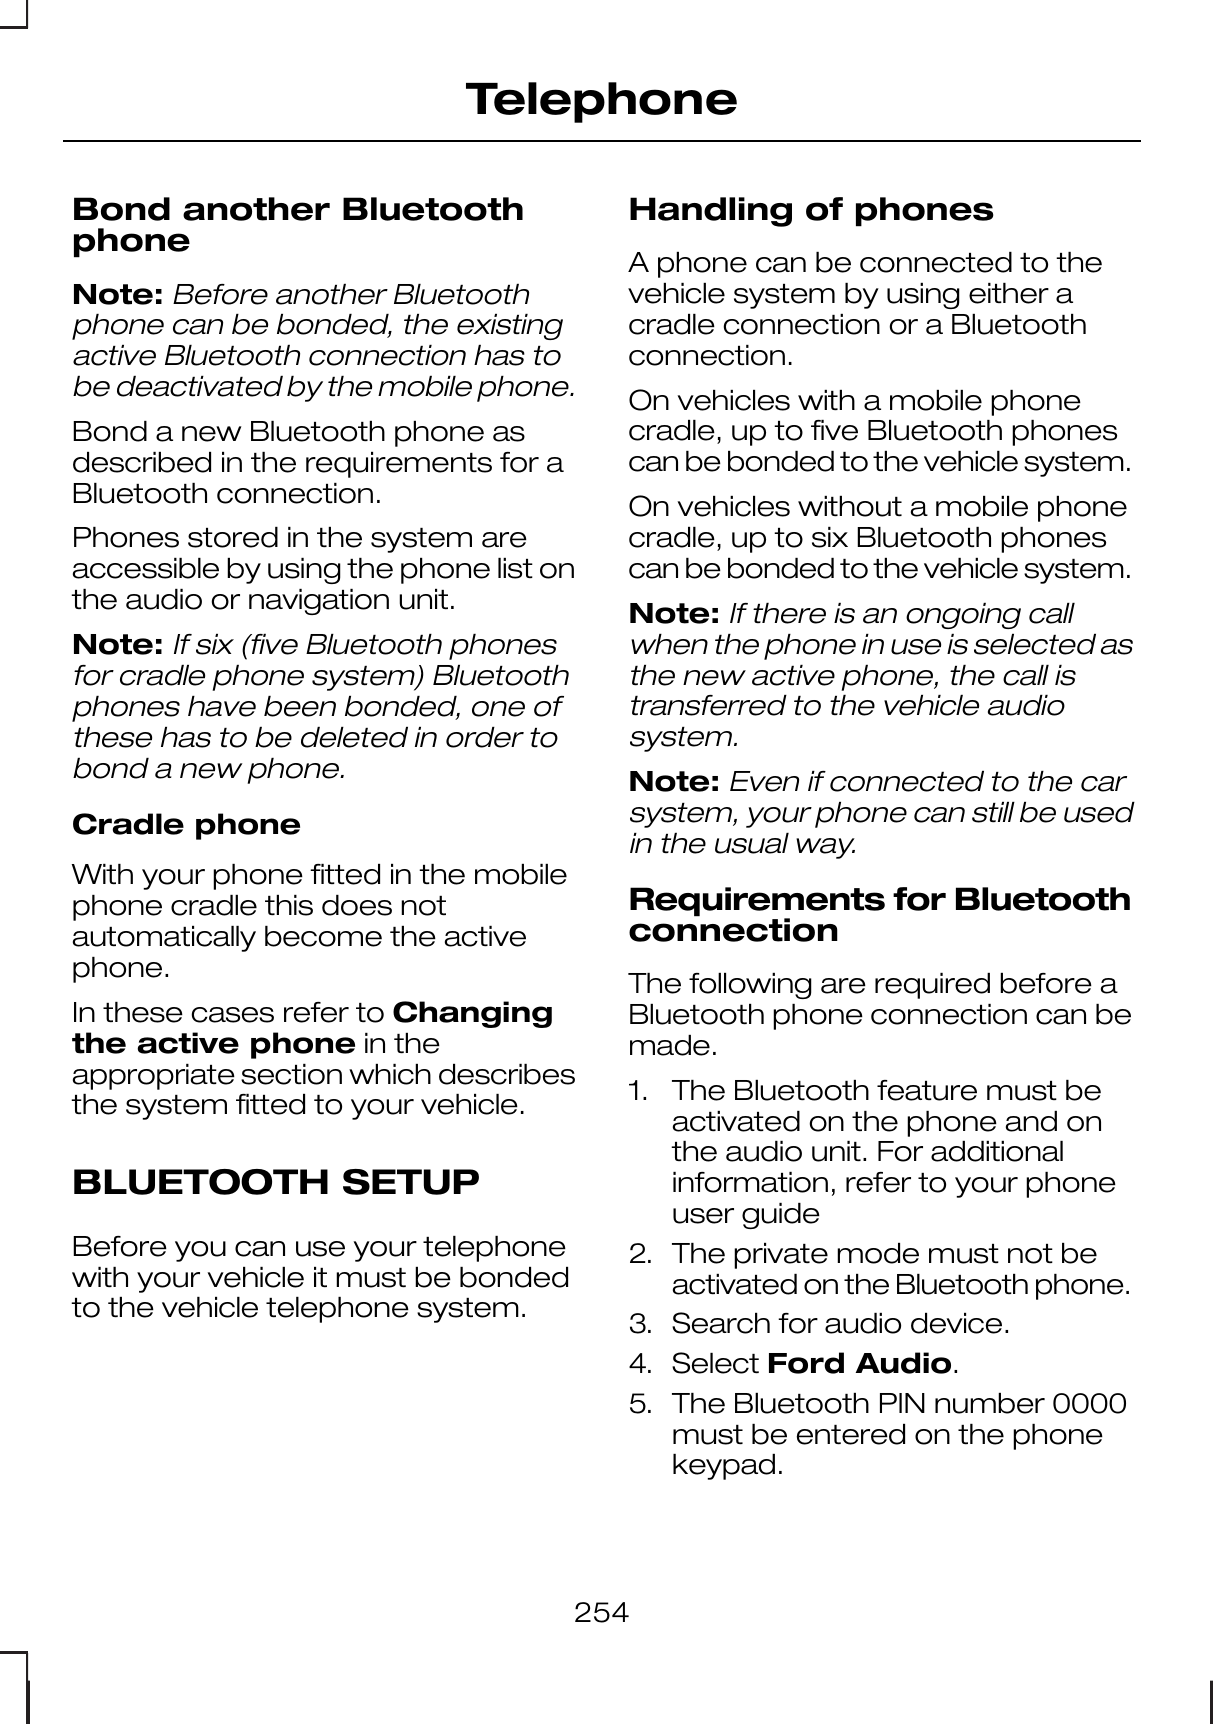 Bond another BluetoothphoneNote:Before another Bluetoothphone can be bonded, the existingactive Bluetooth connection has tobe deactivated by the mobile phone.Bond a new Bluetooth phone asdescribed in the requirements for aBluetooth connection.Phones stored in the system areaccessible by using the phone list onthe audio or navigation unit.Note:If six (five Bluetooth phonesfor cradle phone system) Bluetoothphones have been bonded, one ofthese has to be deleted in order tobond a new phone.Cradle phoneWith your phone fitted in the mobilephone cradle this does notautomatically become the activephone.In these cases refer to Changingthe active phone in theappropriate section which describesthe system fitted to your vehicle.BLUETOOTH SETUPBefore you can use your telephonewith your vehicle it must be bondedto the vehicle telephone system.Handling of phonesA phone can be connected to thevehicle system by using either acradle connection or a Bluetoothconnection.On vehicles with a mobile phonecradle, up to five Bluetooth phonescan be bonded to the vehicle system.On vehicles without a mobile phonecradle, up to six Bluetooth phonescan be bonded to the vehicle system.Note:If there is an ongoing callwhen the phone in use is selected asthe new active phone, the call istransferred to the vehicle audiosystem.Note:Even if connected to the carsystem, your phone can still be usedin the usual way.Requirements for BluetoothconnectionThe following are required before aBluetooth phone connection can bemade.1. The Bluetooth feature must beactivated on the phone and onthe audio unit. For additionalinformation, refer to your phoneuser guide2. The private mode must not beactivated on the Bluetooth phone.3. Search for audio device.4. Select Ford Audio.5. The Bluetooth PIN number 0000must be entered on the phonekeypad.254Telephone